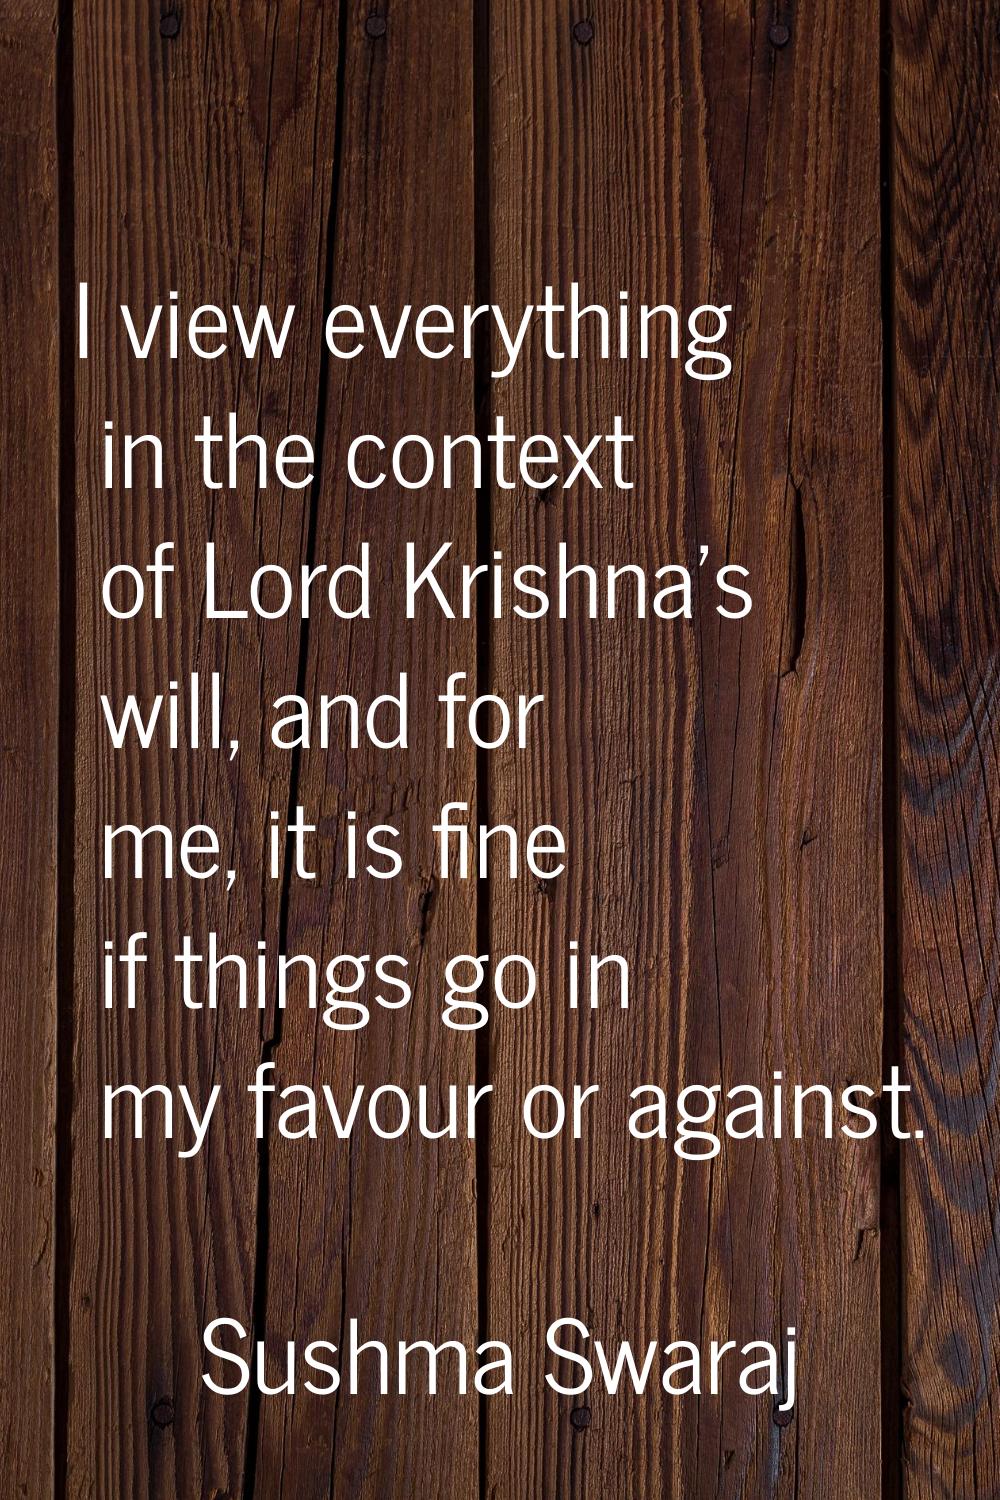 I view everything in the context of Lord Krishna's will, and for me, it is fine if things go in my 